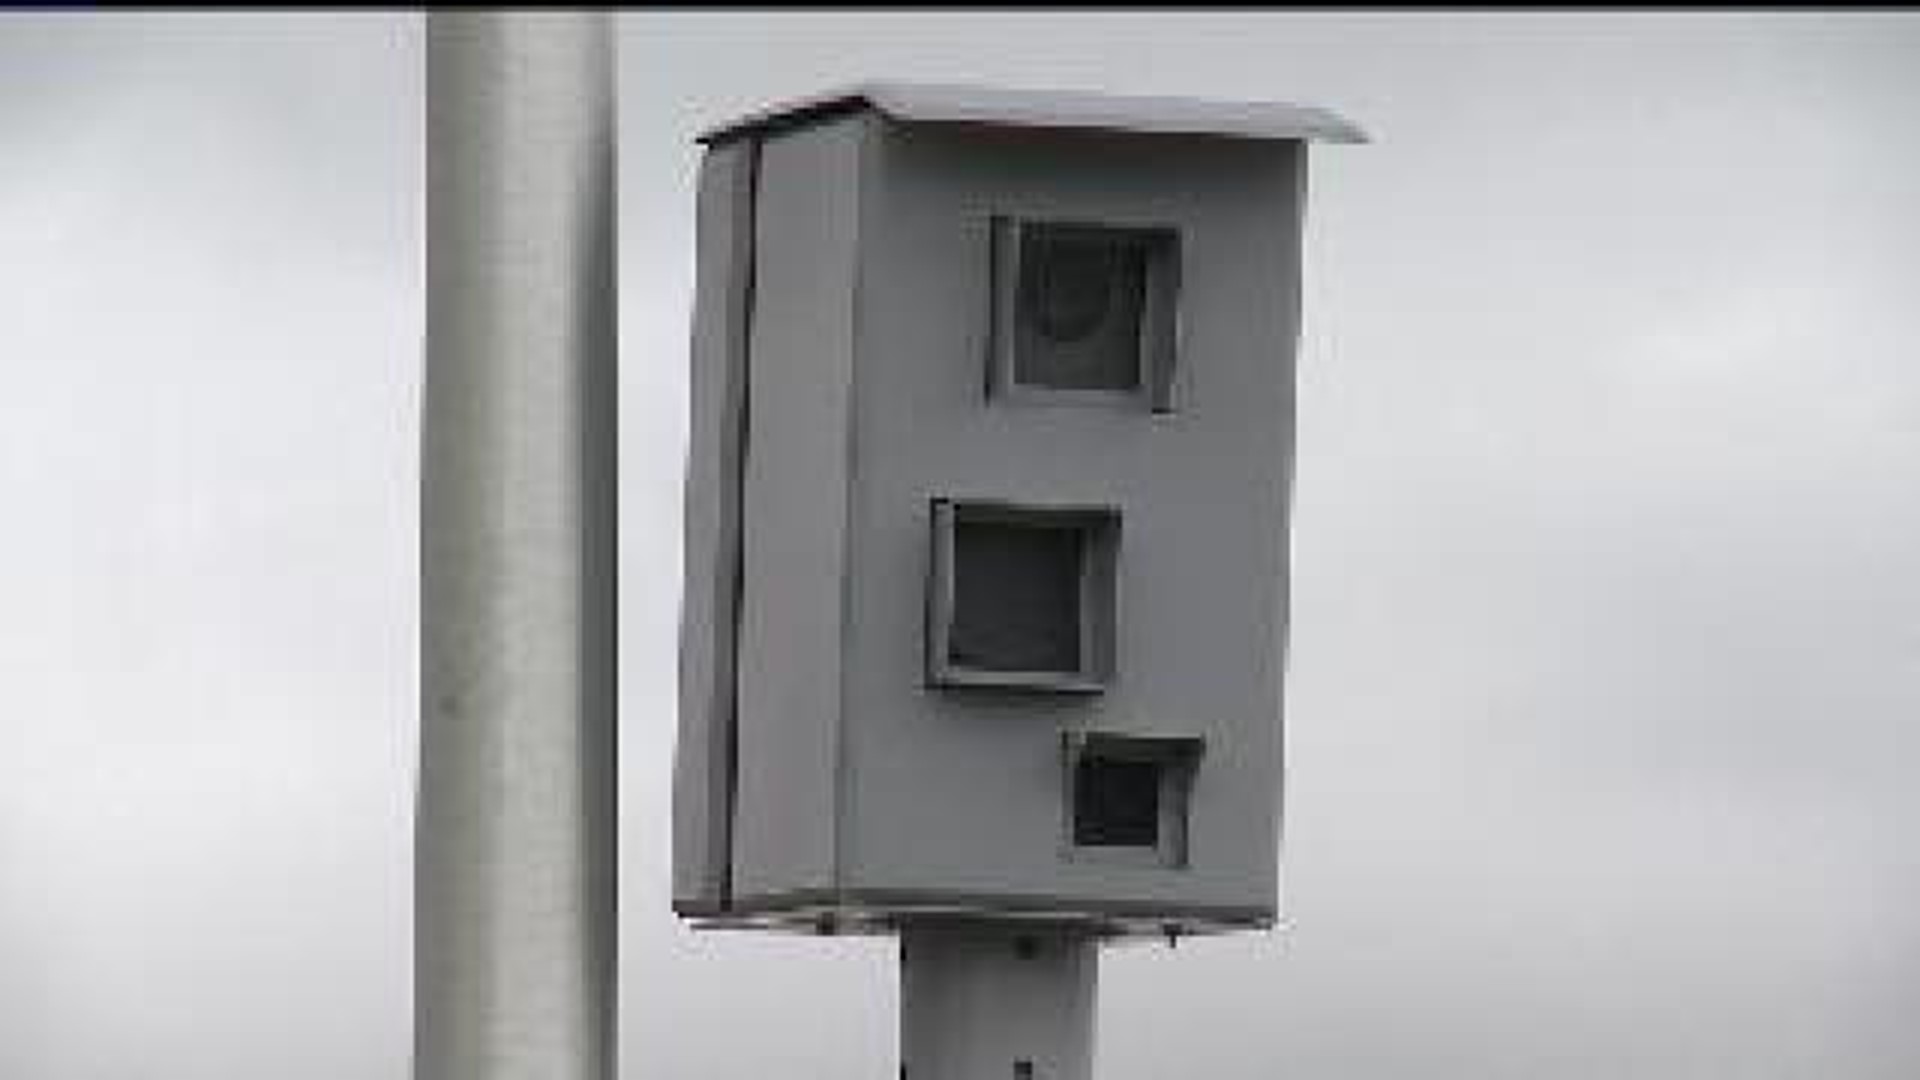 Iowa DOT wants cities to prove traffic cameras improve safety